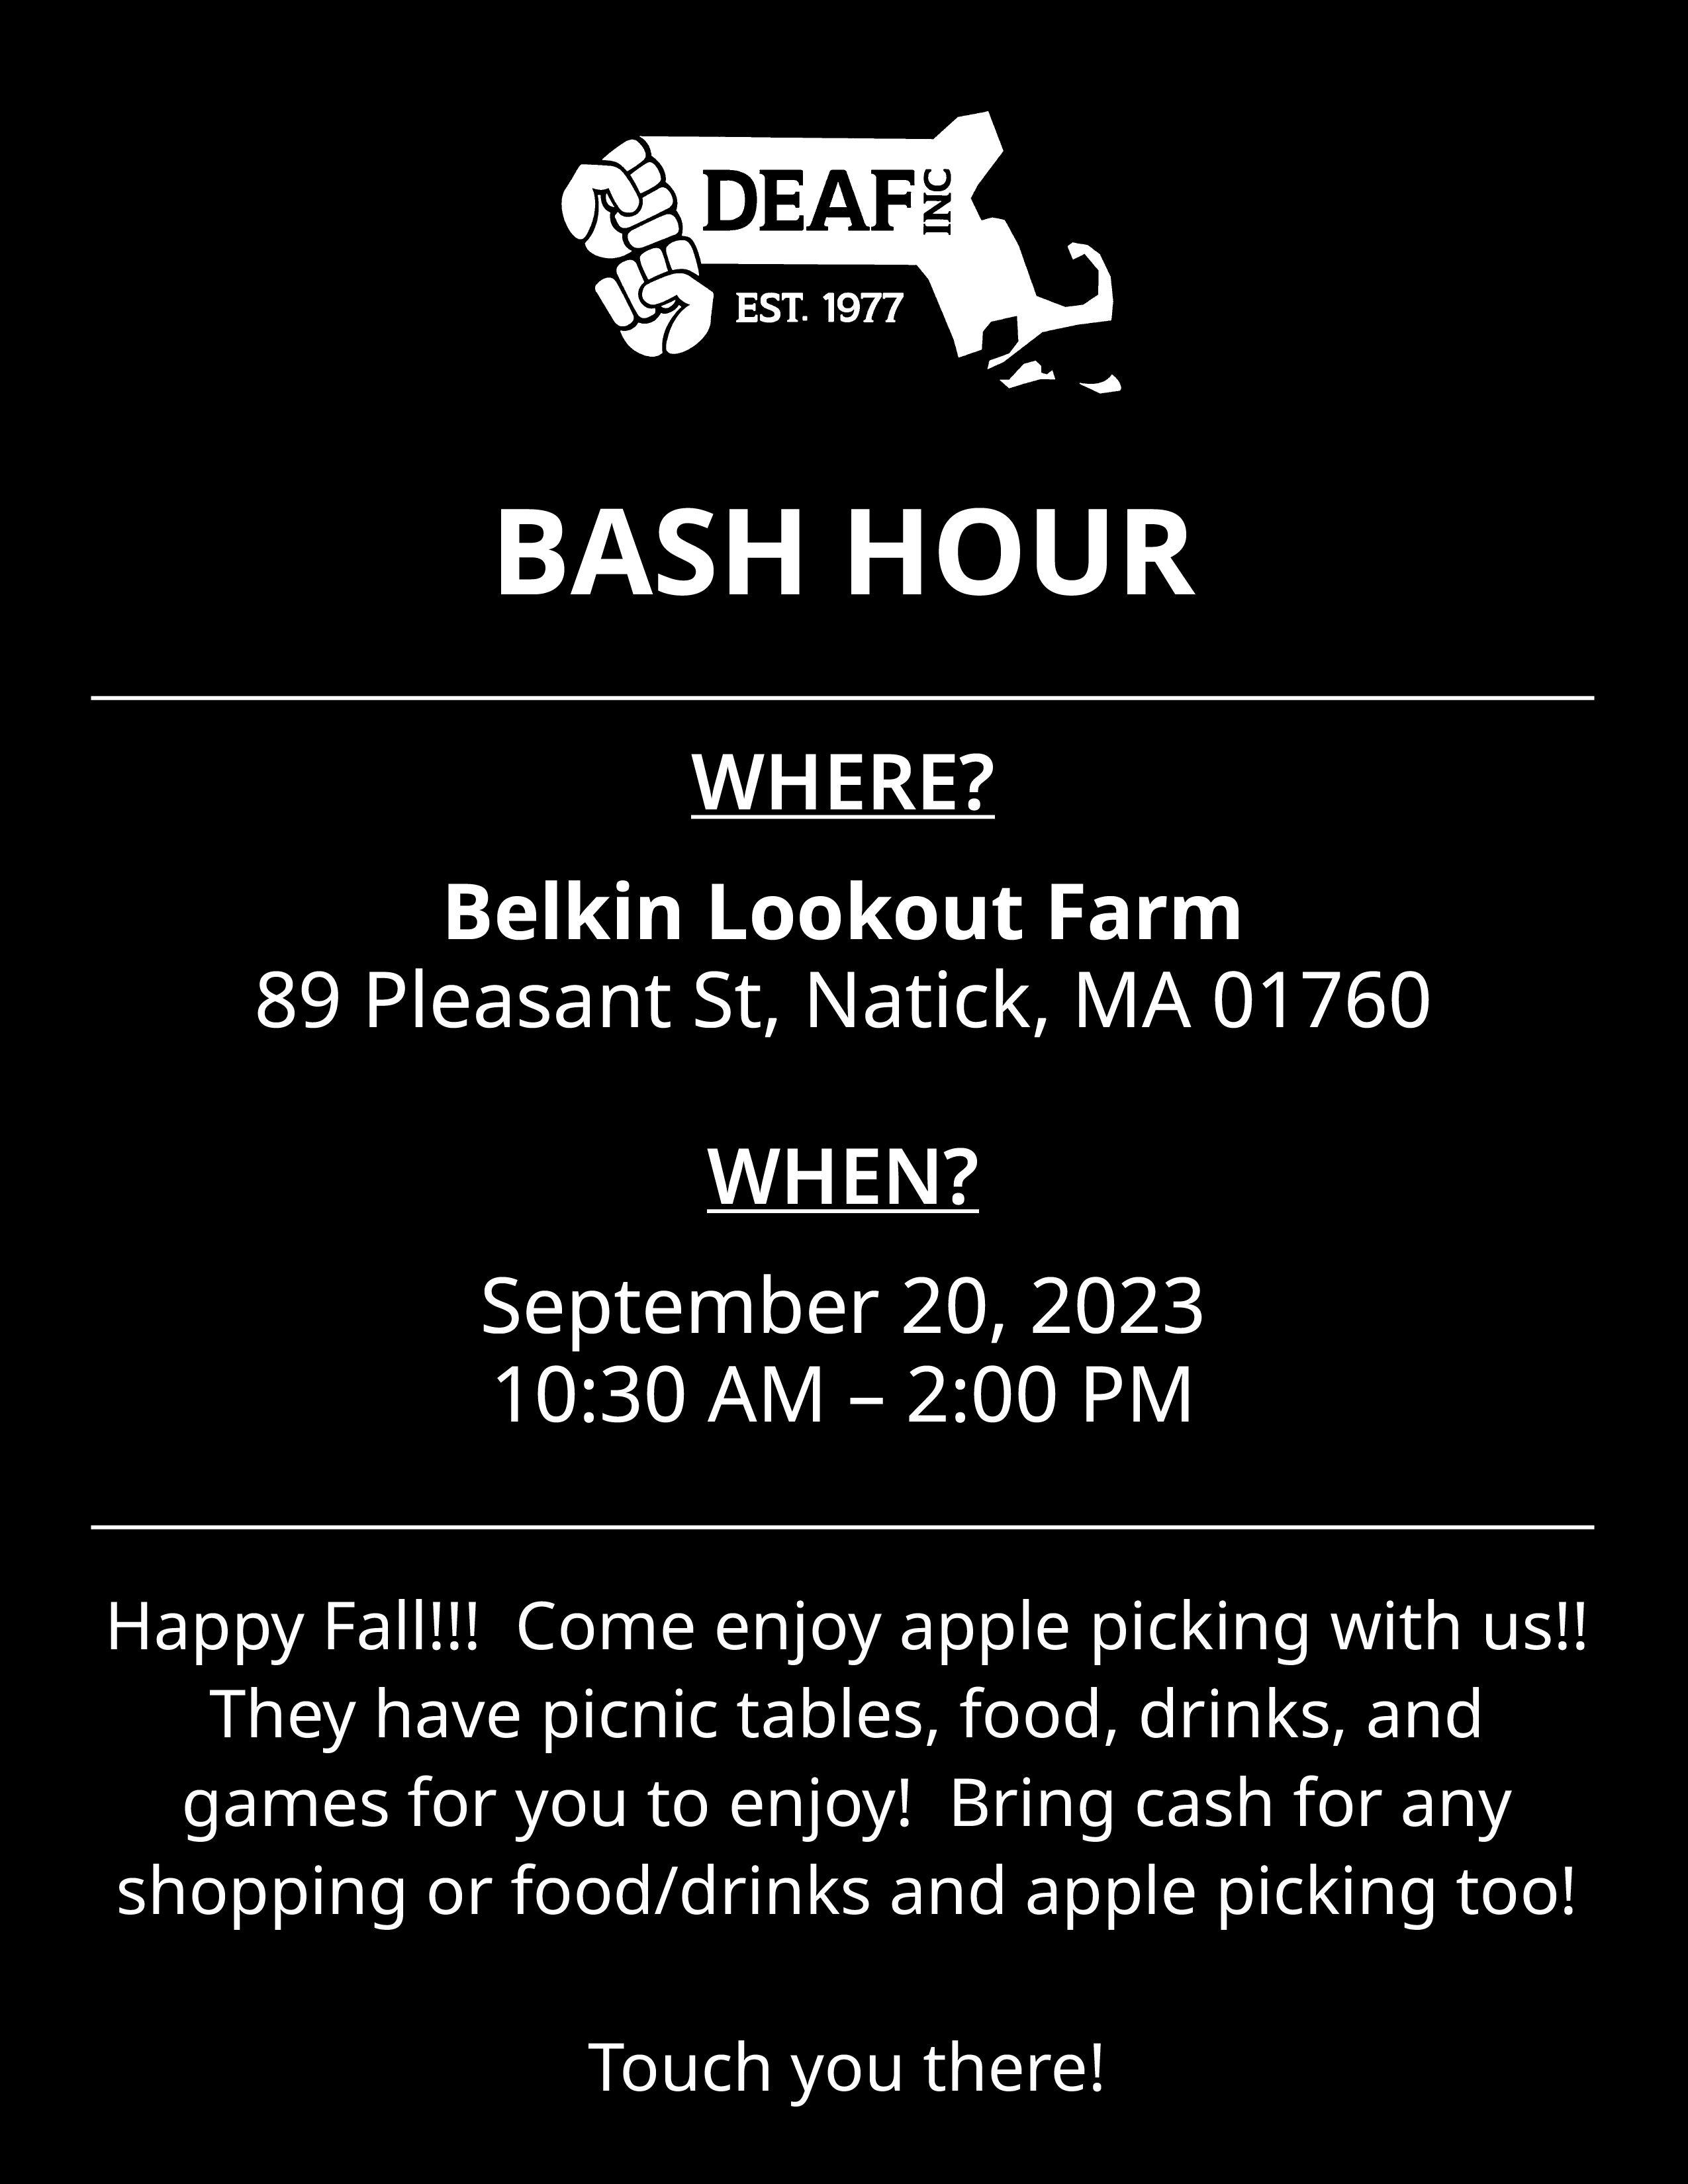 Flyer with black background, white text, and white DEAF, Inc. logo. BASH HOUR WHERE? Belkin Lookout Farm, 89 Pleasant St, Natick, MA 01760 WHEN? September 20, 2023, 10:30 AM - 2:00 PM Happy Fall!!! Come enjoy apple picking with us!! They have picnic tables, food, drinks, and games for you to enjoy! Bring cash for any shopping or food/drinks and apple picking too! Touch you there!